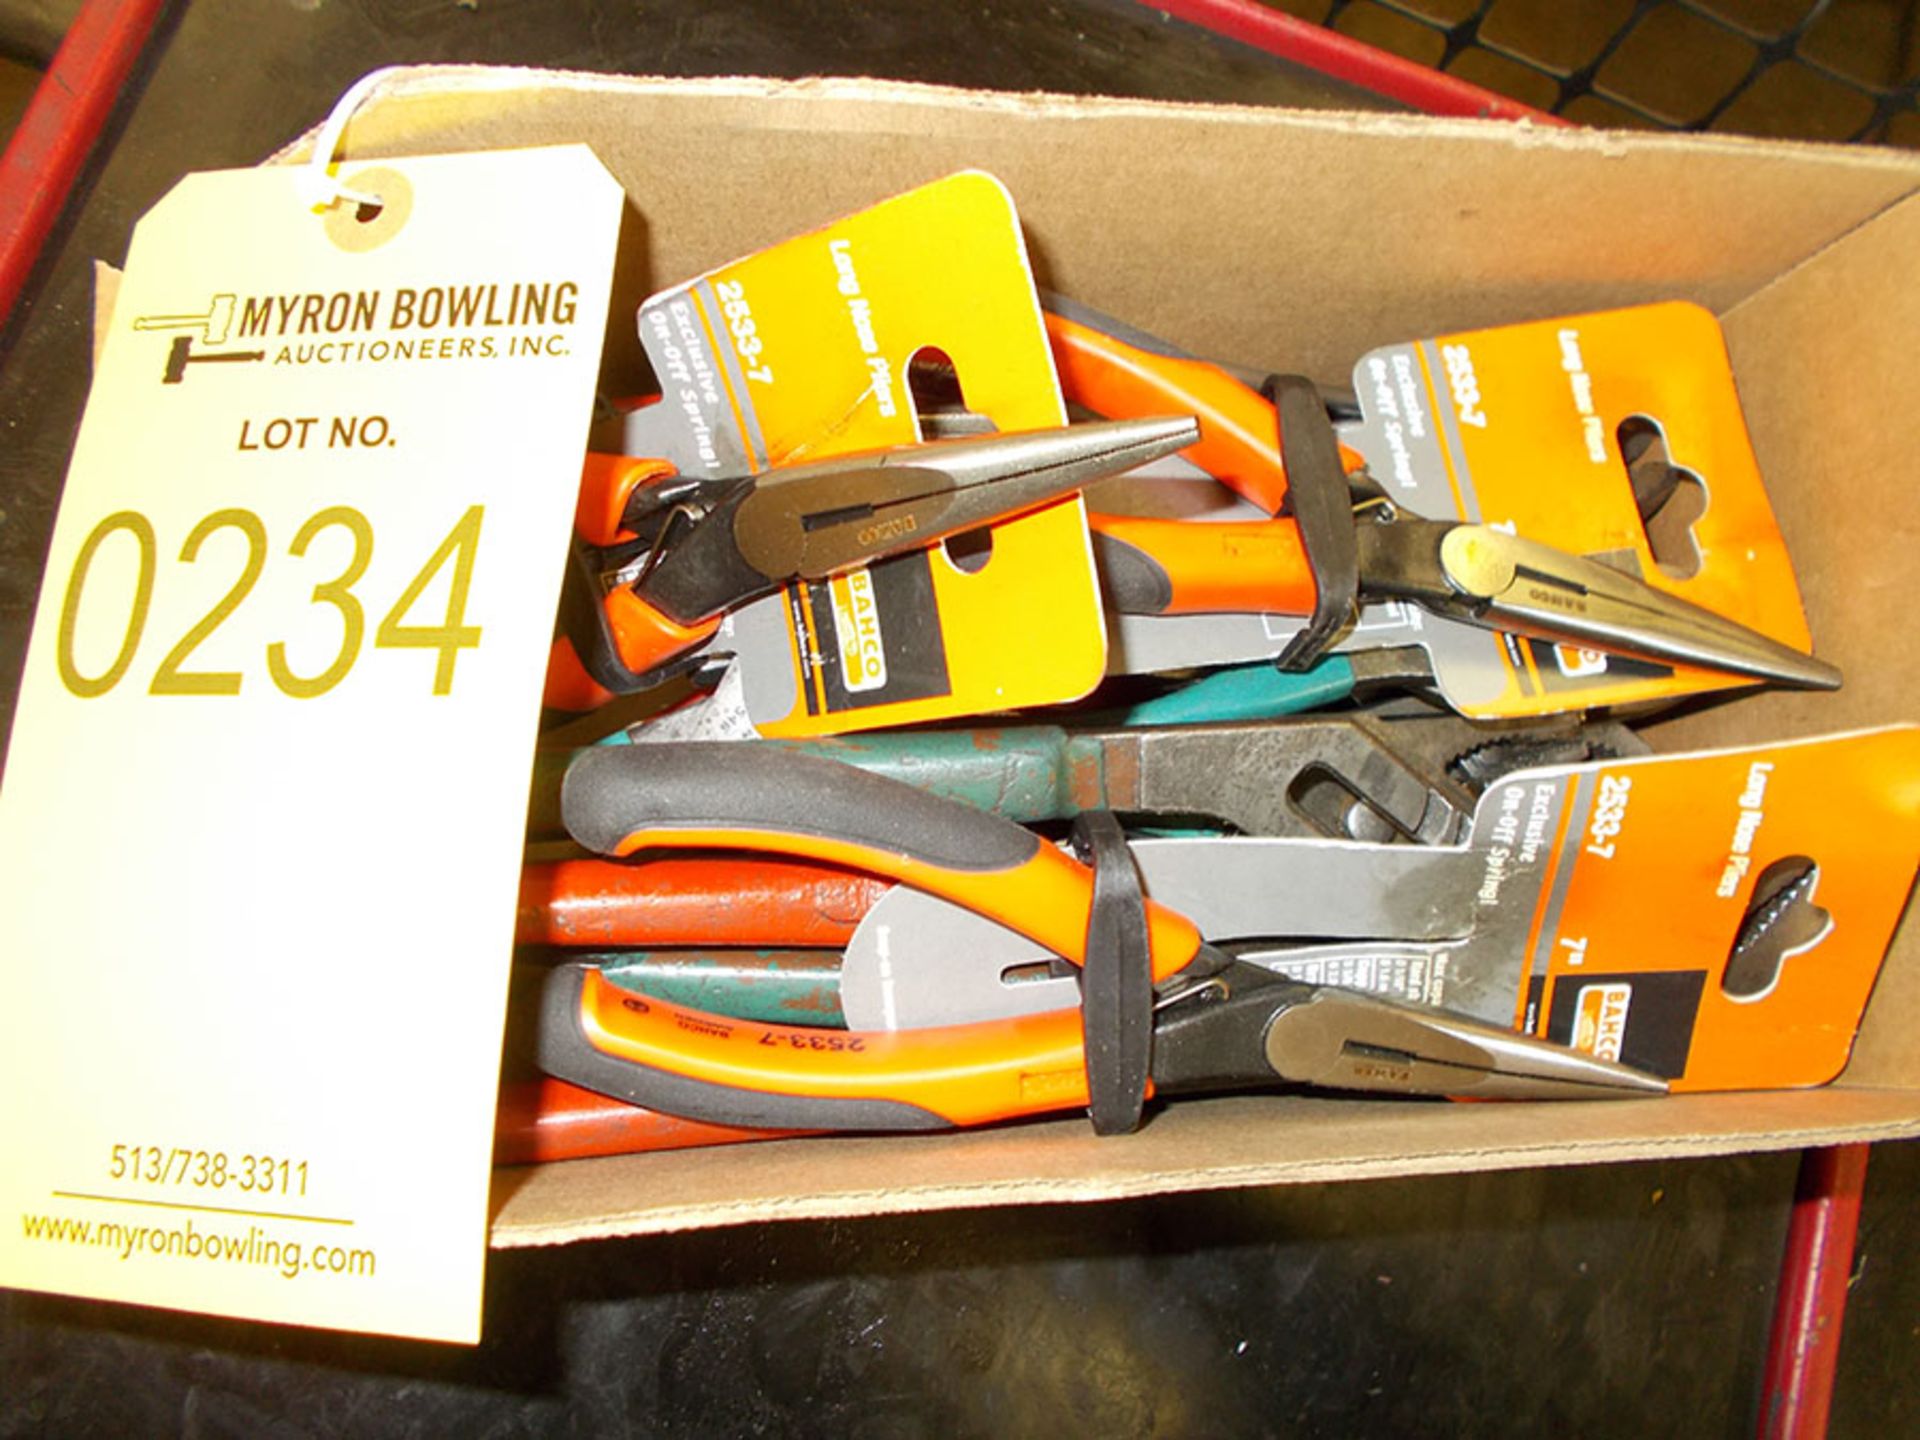 BOX OF PLIERS